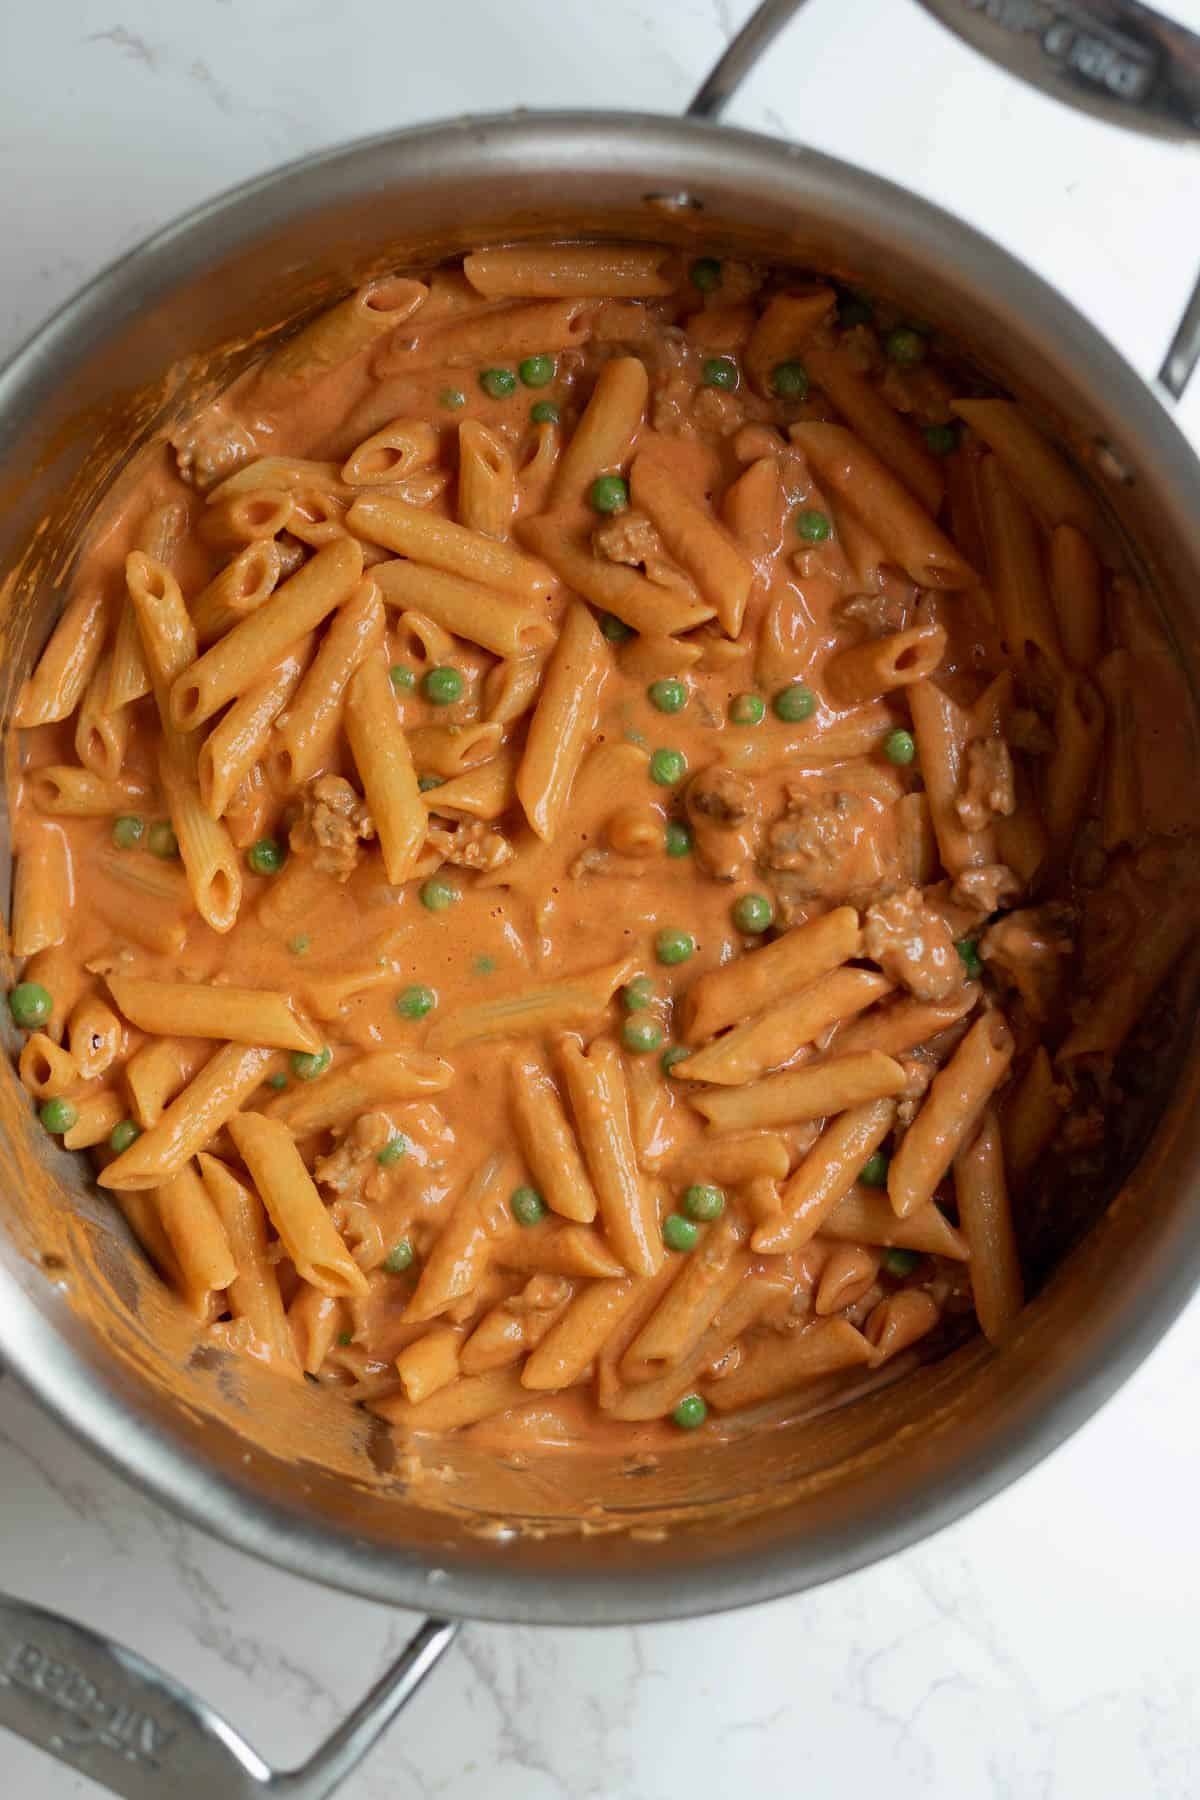 penne alla vodka with peas and pasta in a large silver pot